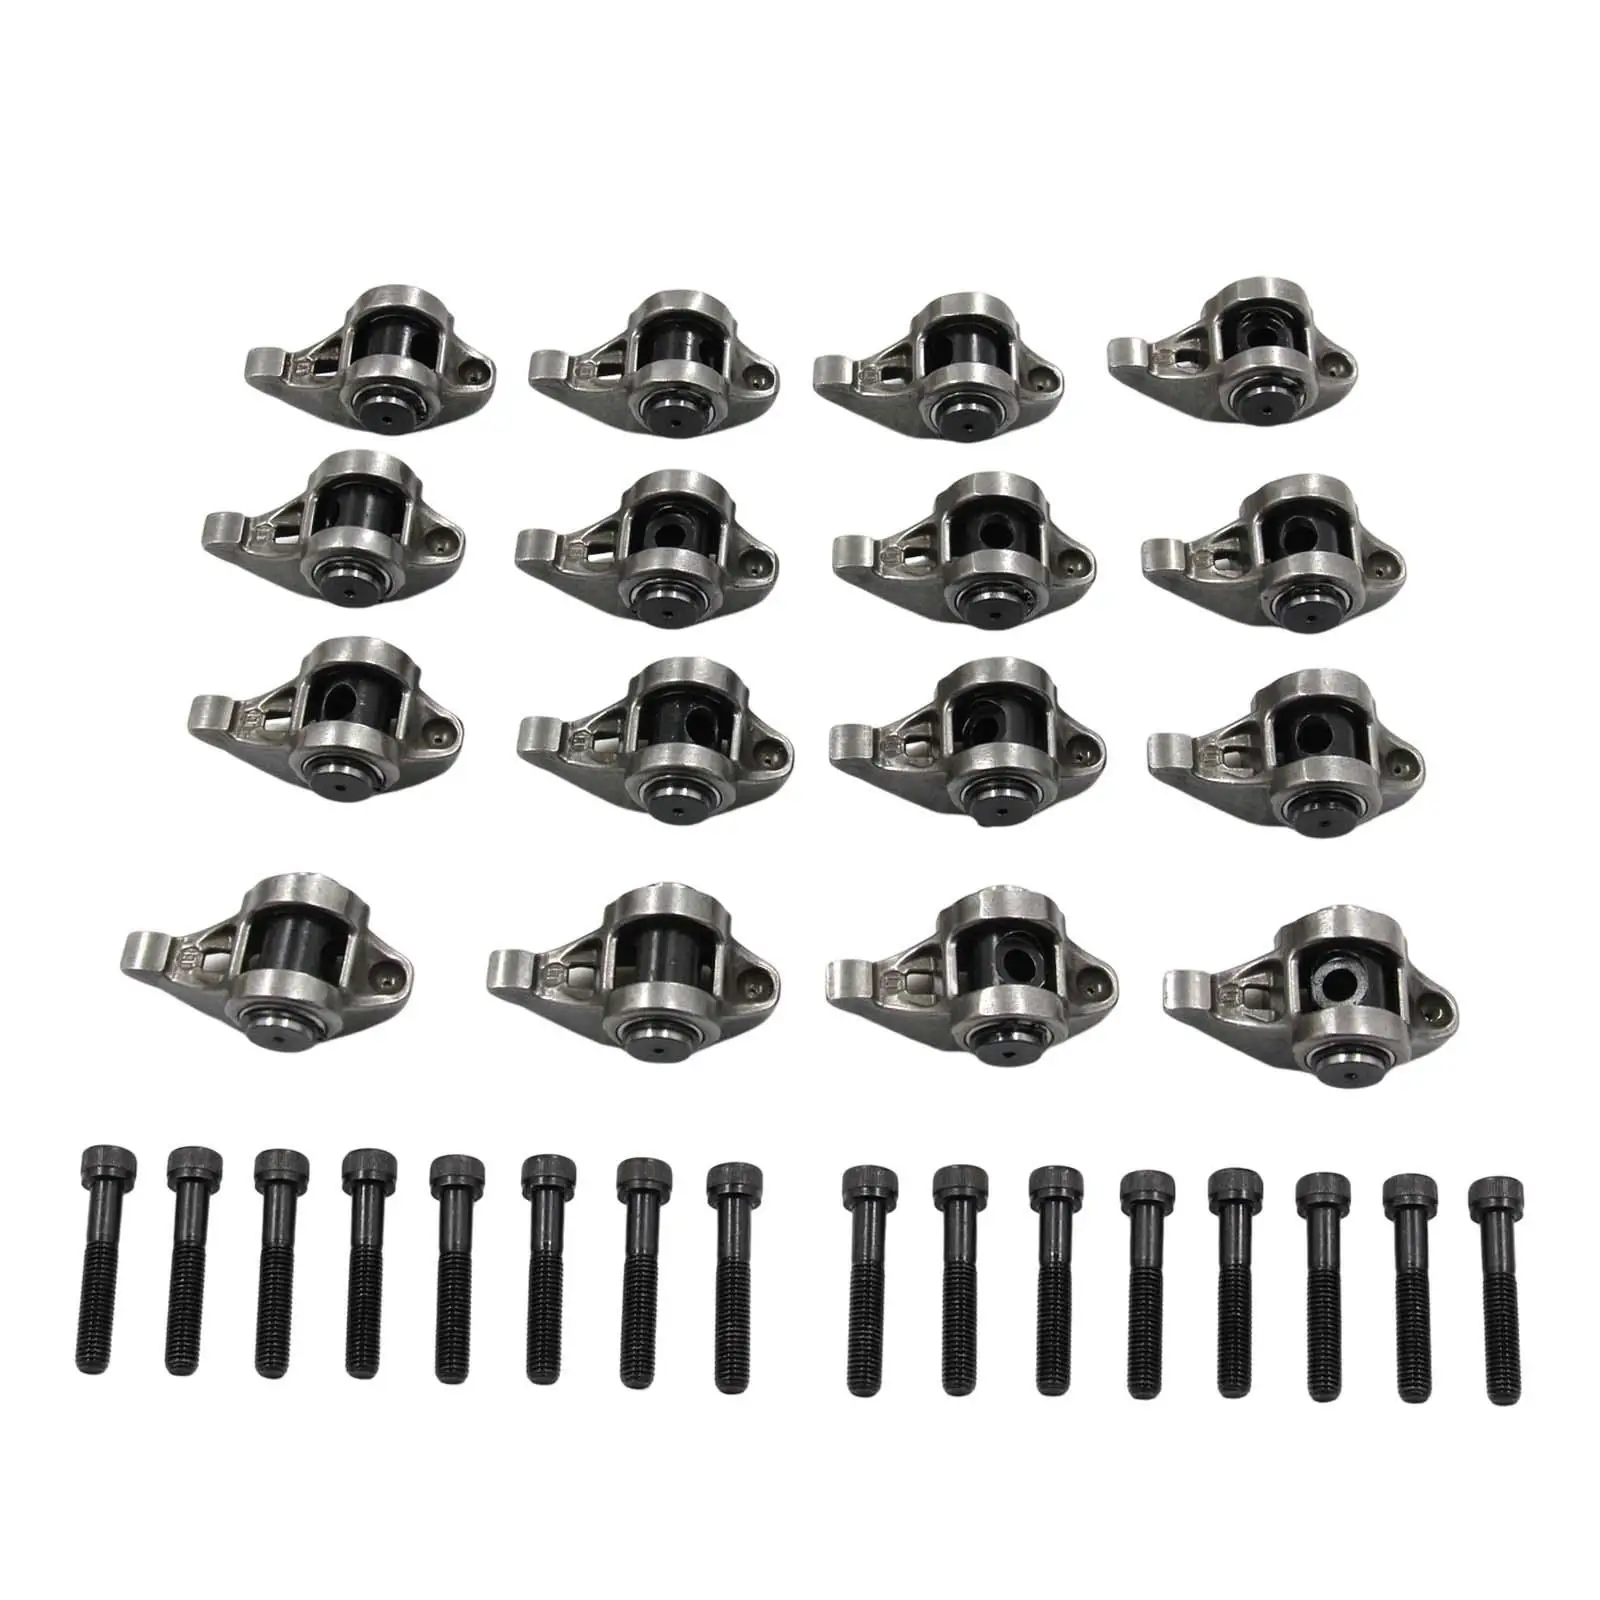 16 Pieces Rocker Arms and Bolts Kit 10214664 Steel Easy Installation Accessories